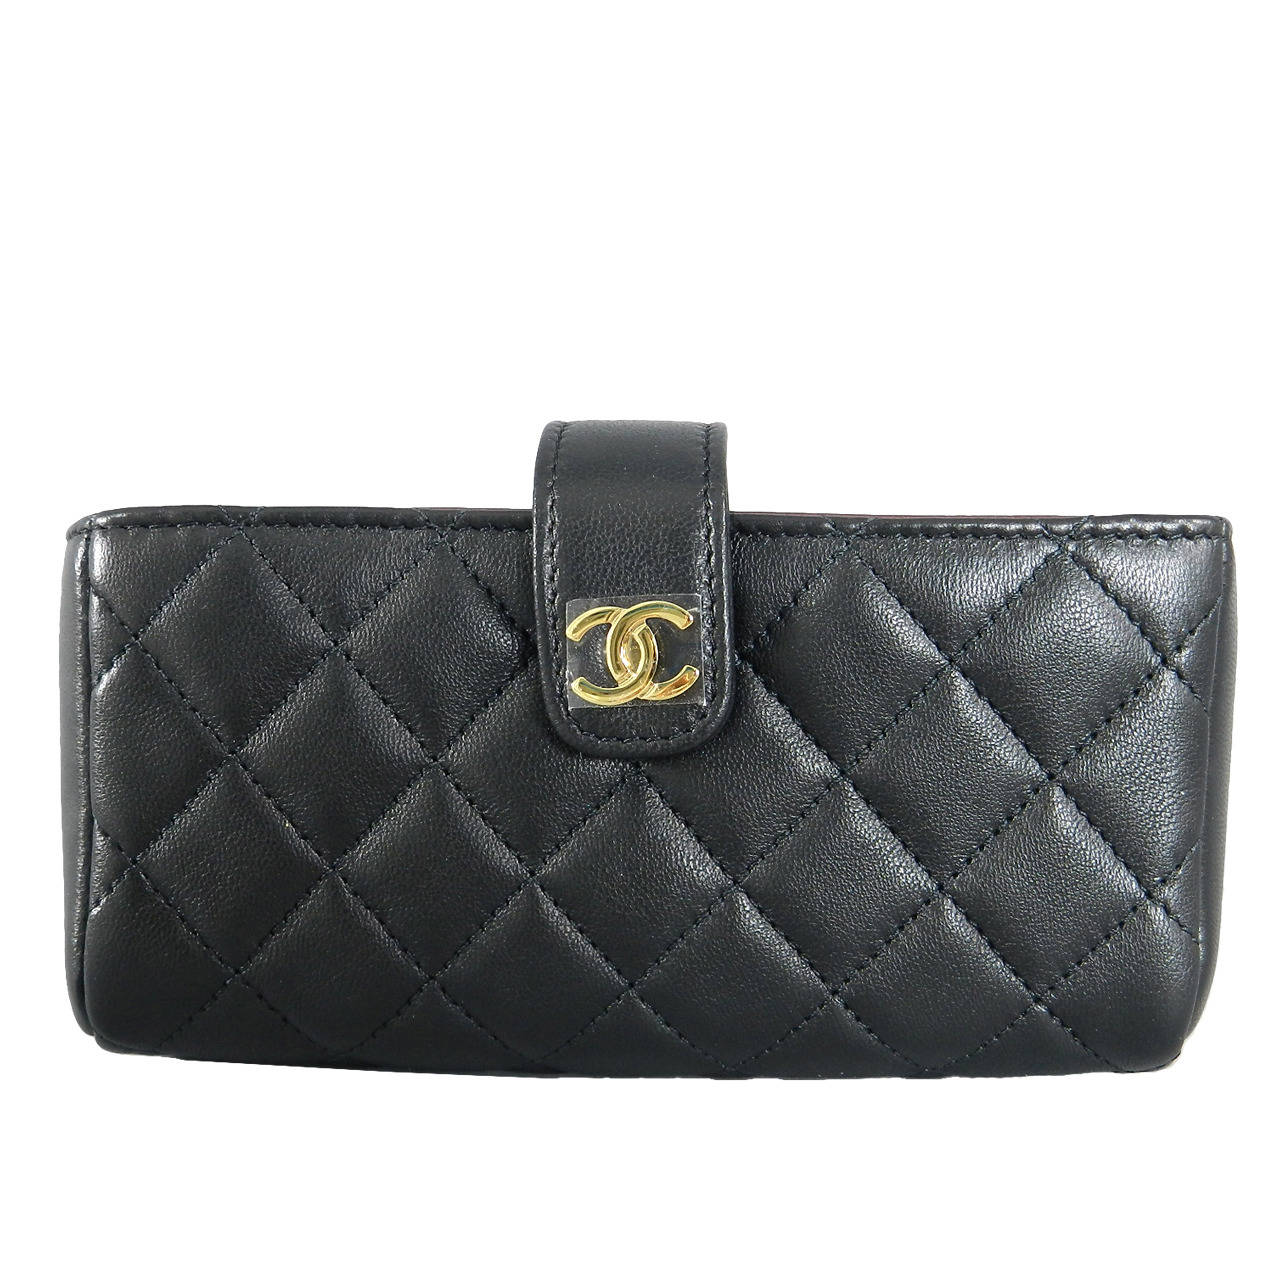 Chanel Small Quilted Leather Clutch